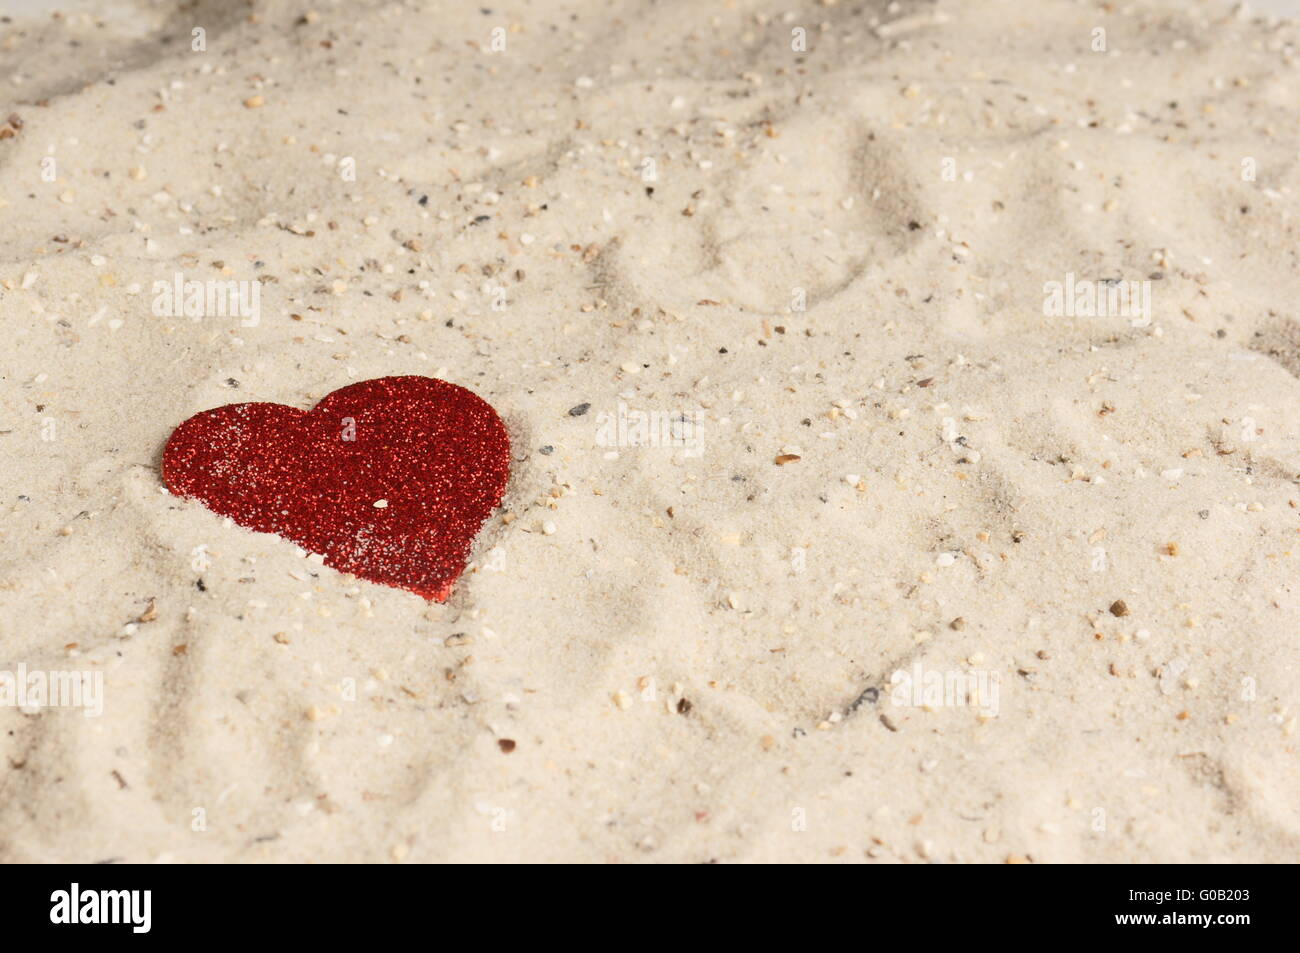 Red heart lying in the sand Stock Photo